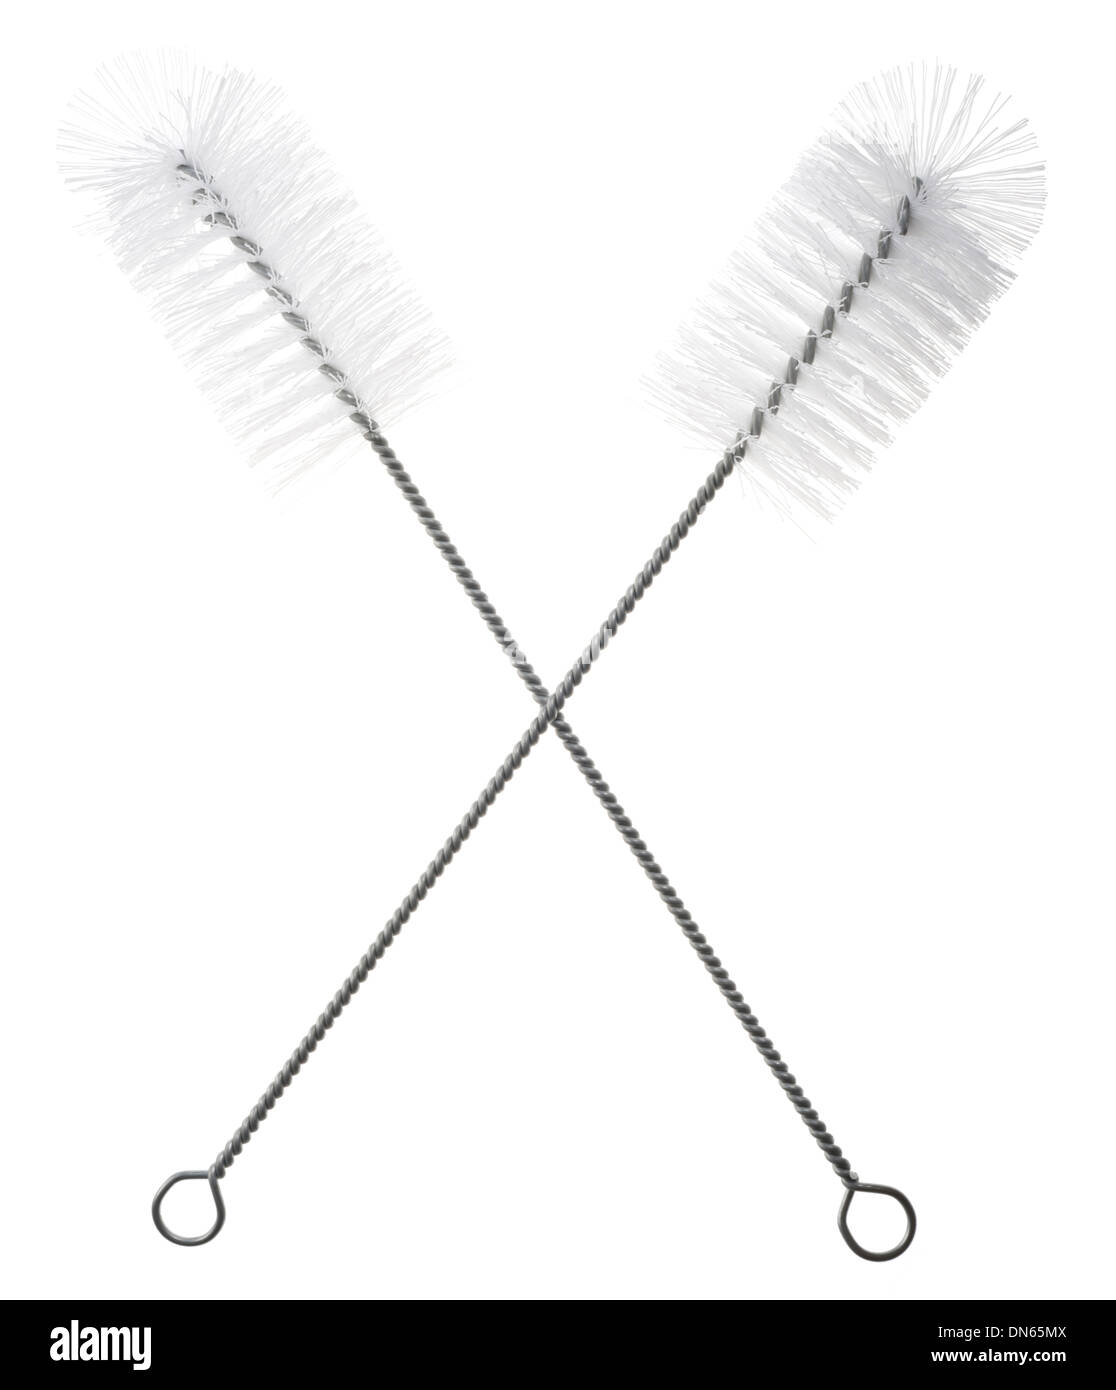 Bottle brushes for cleaning bottles and other tubular items. Pair of brushes together to form an X. Stock Photo